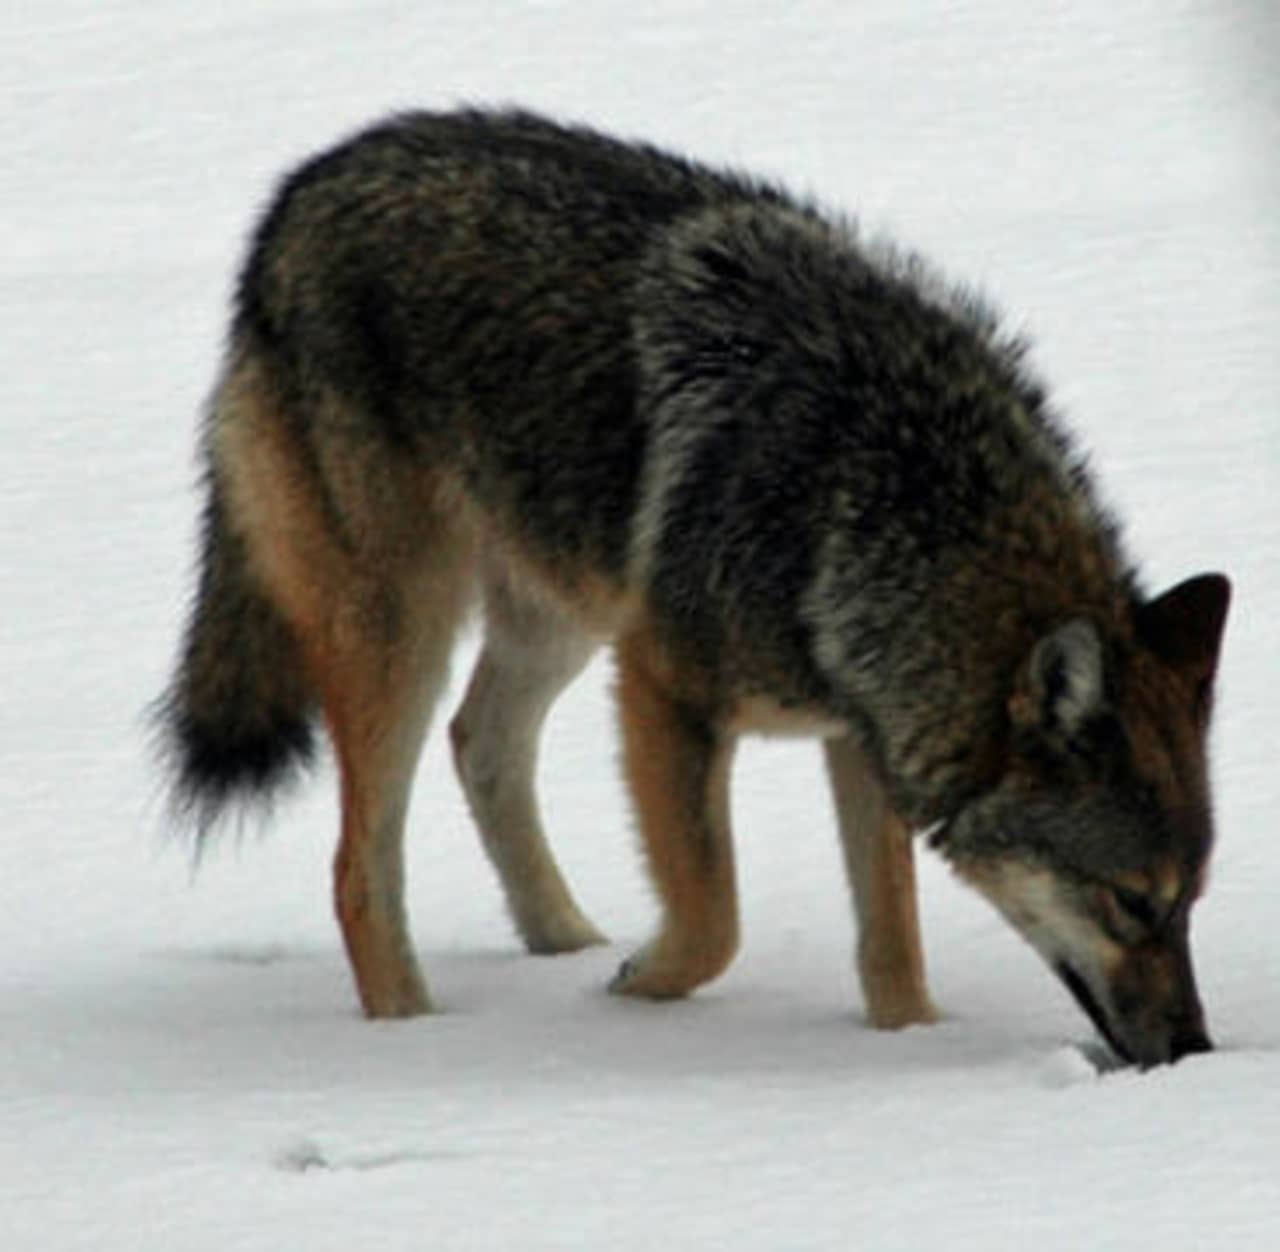 New Canaan is offering a free seminar on coyotes and their behavior in April. The Fairfield County town is being proactive after a local resident and pet pooch had a scary run-in with one of the wolf-like critters.